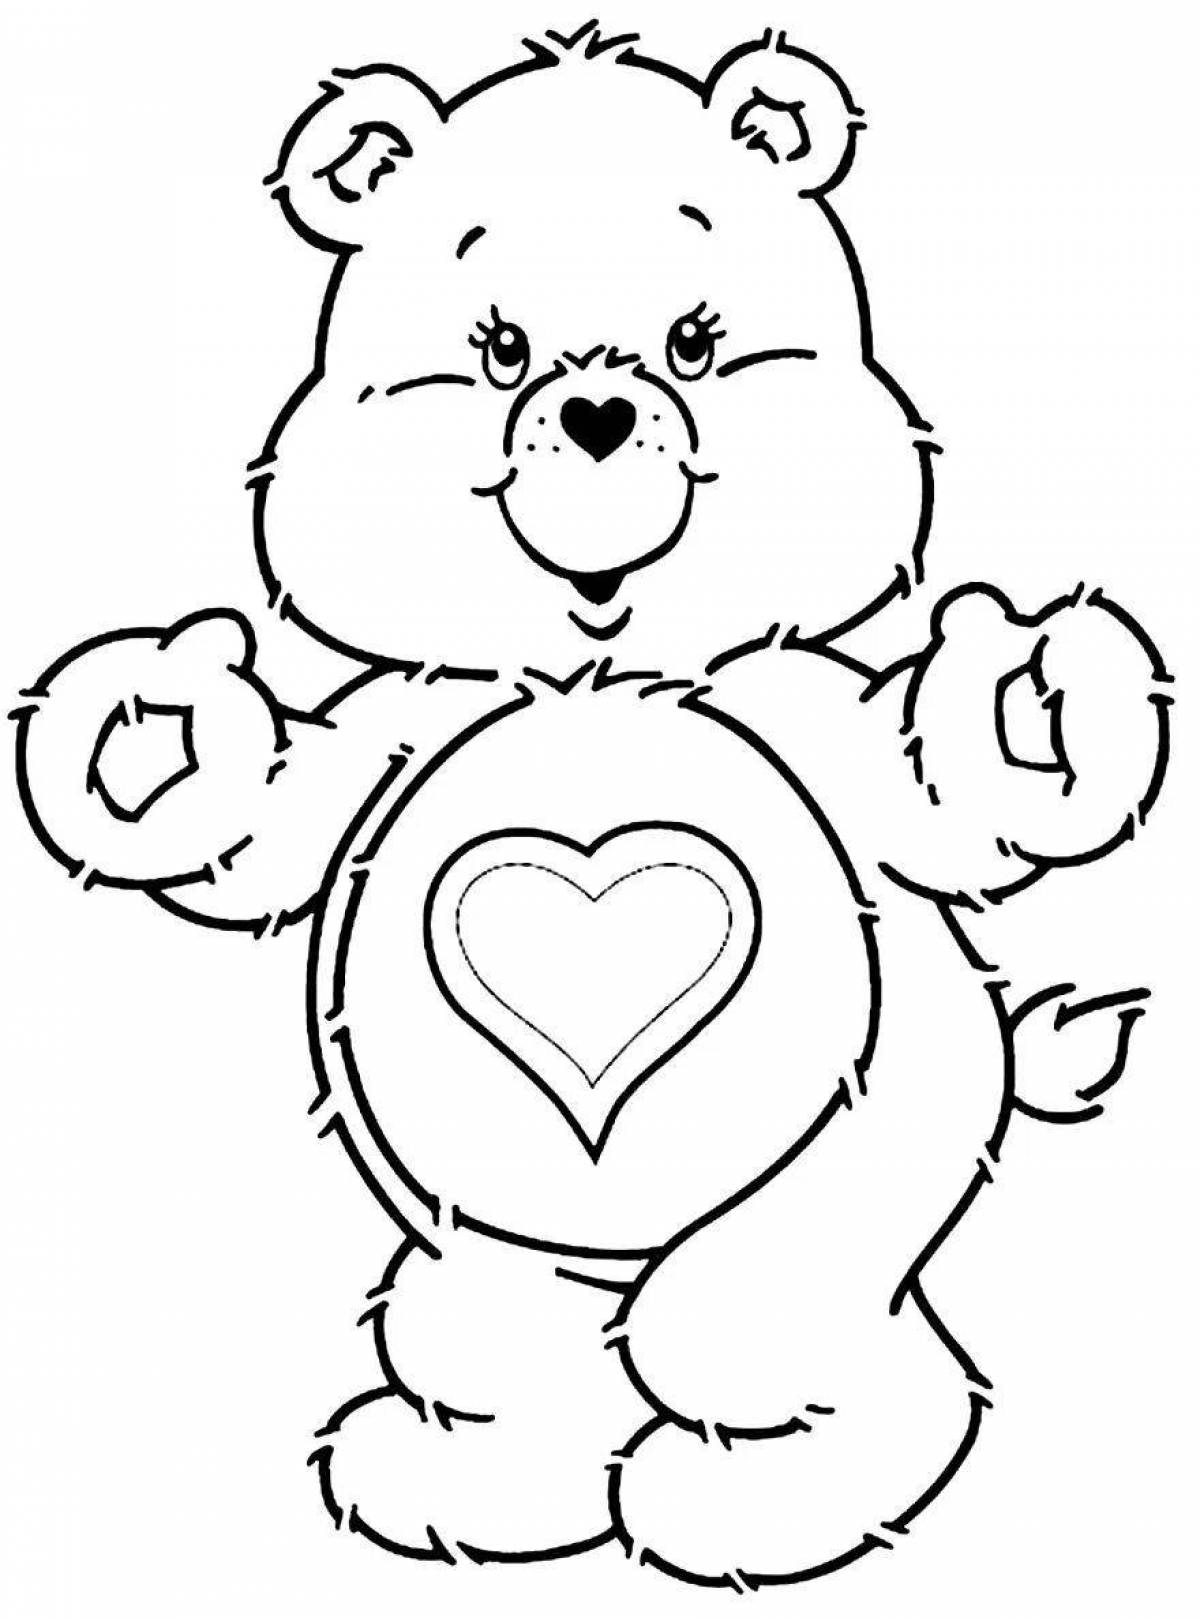 Cute and happy teddy bear coloring book